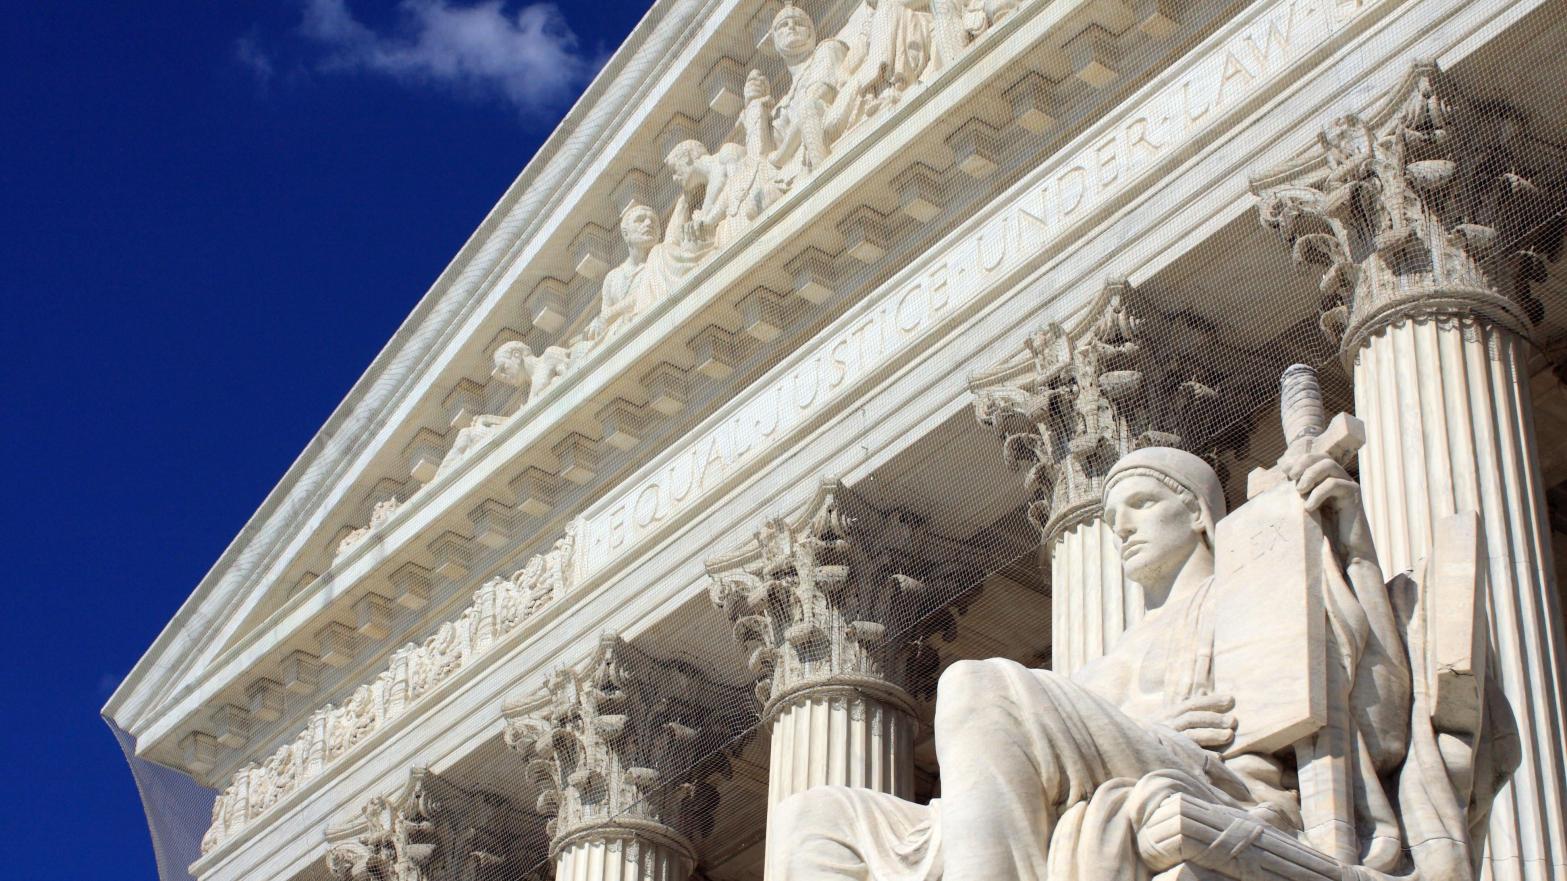 The Supreme Court will soon have the power to completely upend how companies handle third-party content on the internet. (Photo: J Main, Shutterstock)